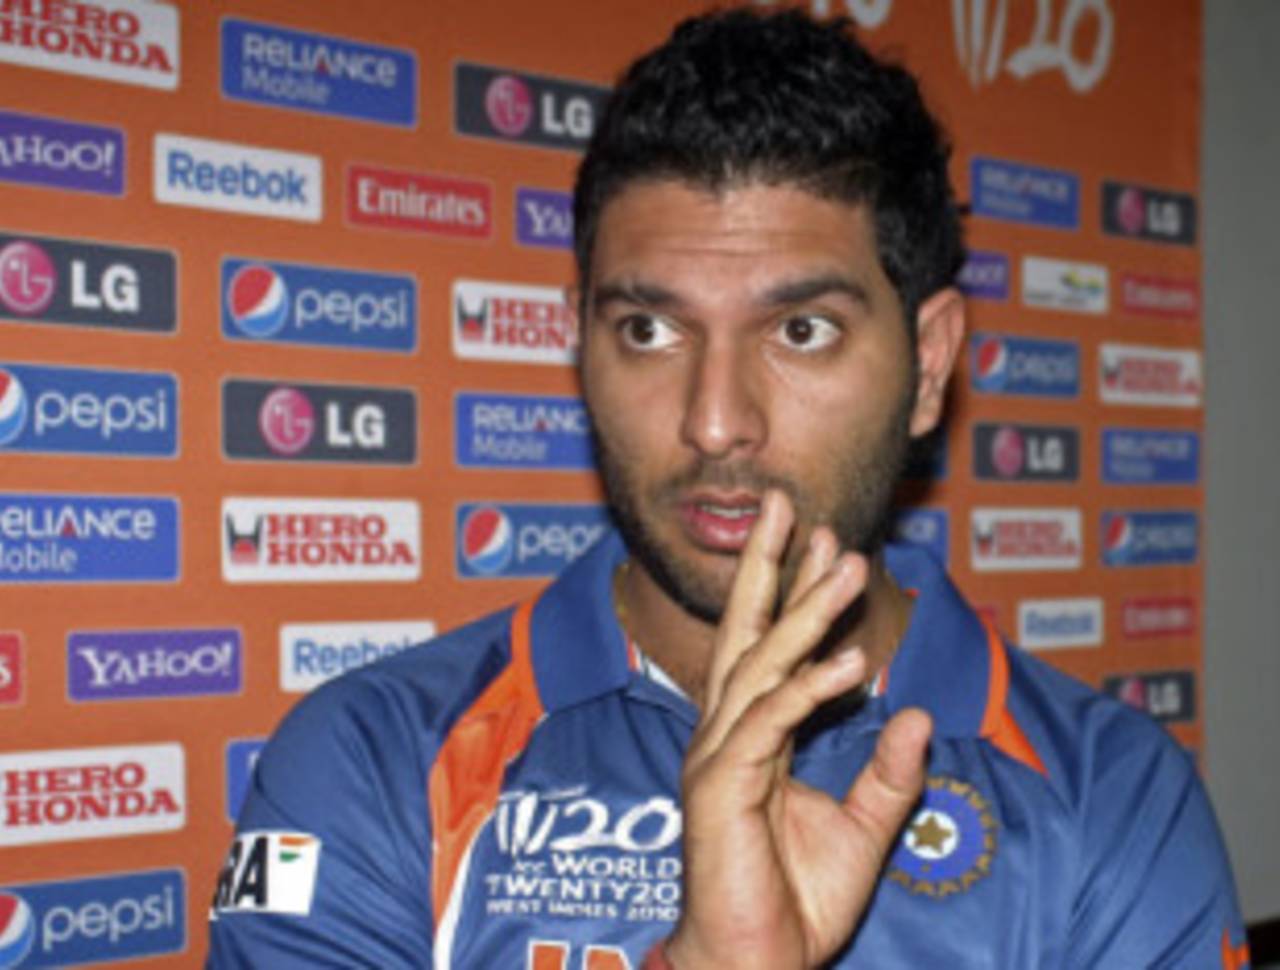 Yuvraj Singh fields questions from reporters ahead of India's World Twenty20 campaign, St Lucia, April 29, 2010